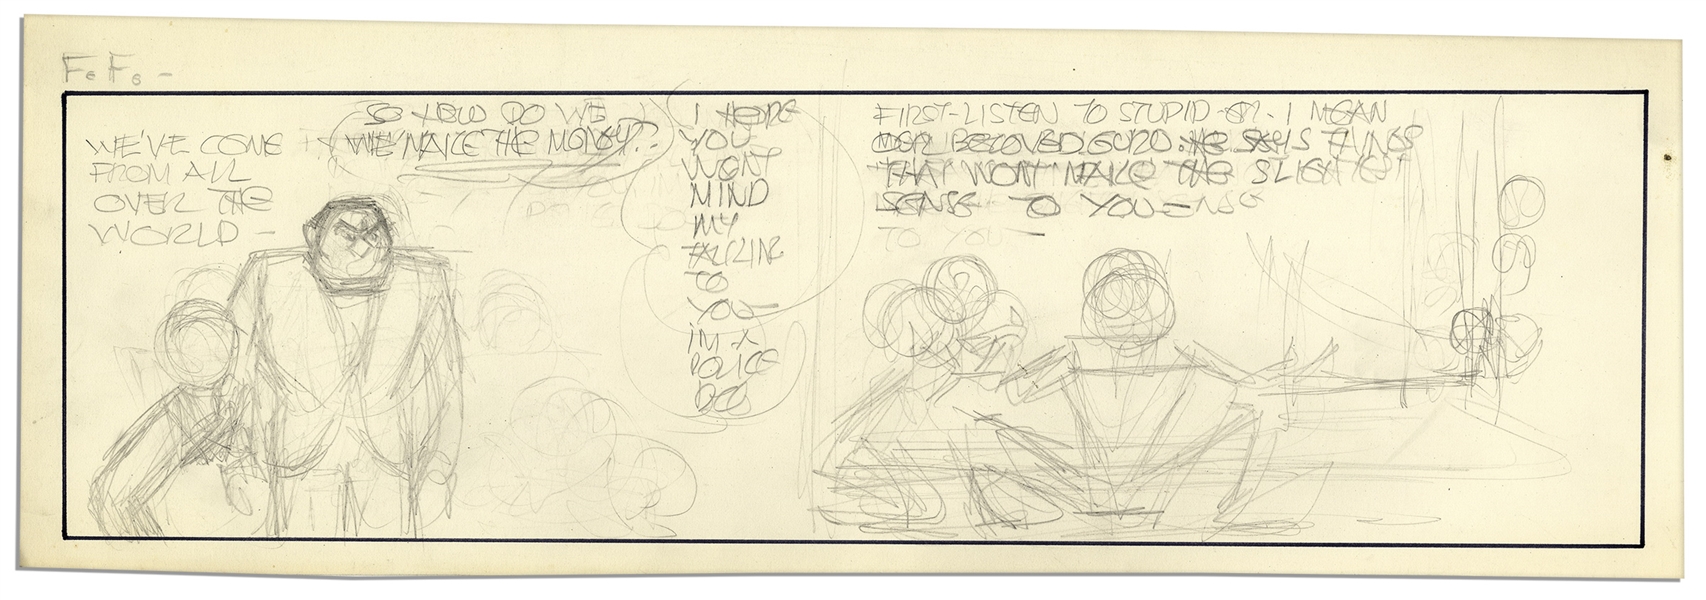 Al Capp ''Li'l Abner'' Unfinished Hand-Drawn Comic Strip in Pencil Very Preliminary Sketches With Dialogue -- Measures 19'' x 6.25'' -- Very Good -- From the Al Capp Estate